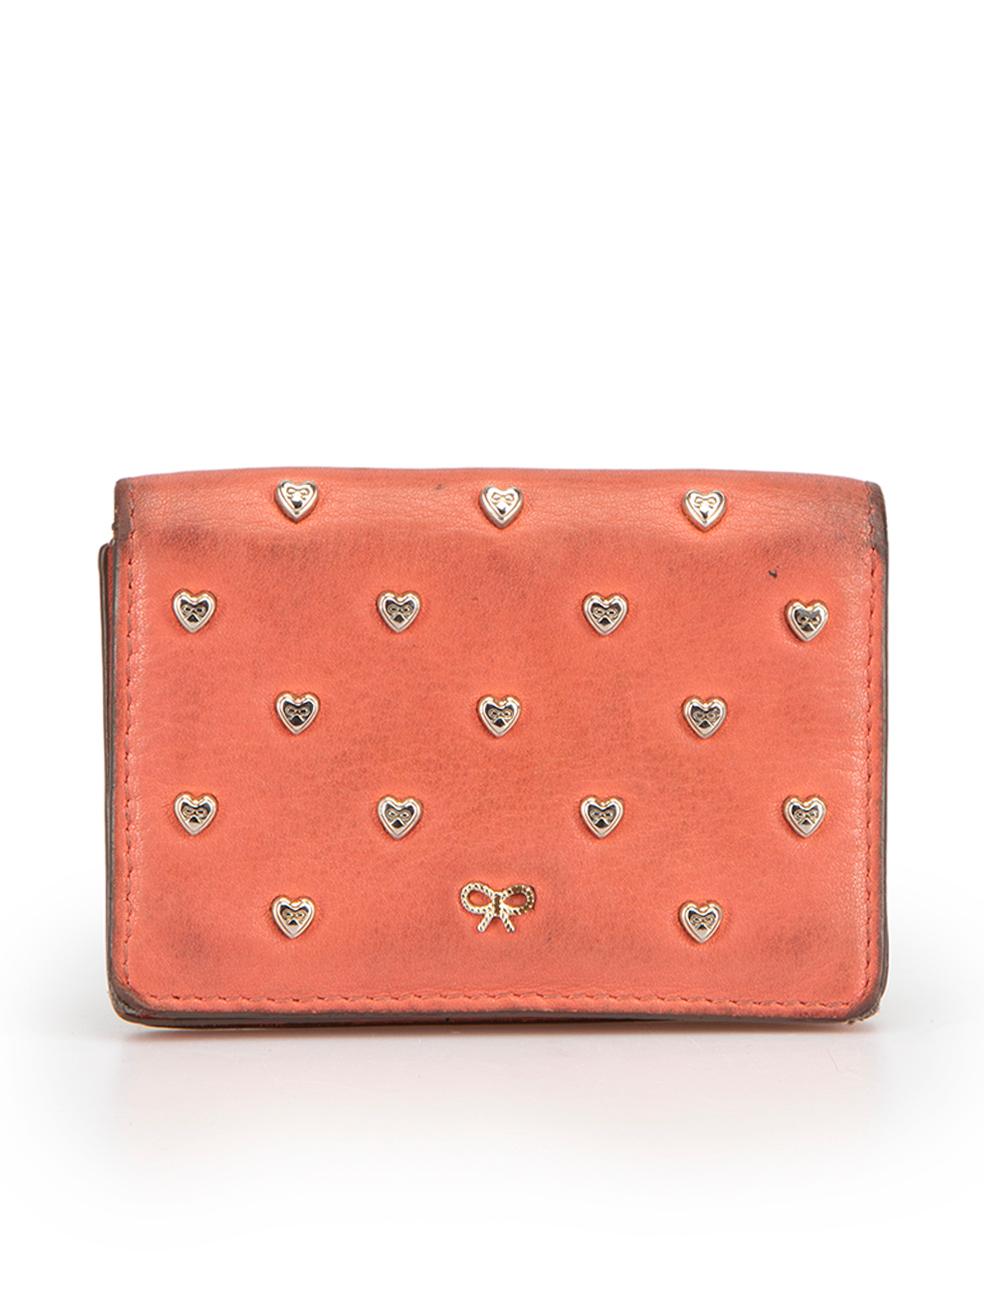 Anya Hindmarch Women's Coral Leather Joss Heart Studded Card Case In Good Condition For Sale In London, GB